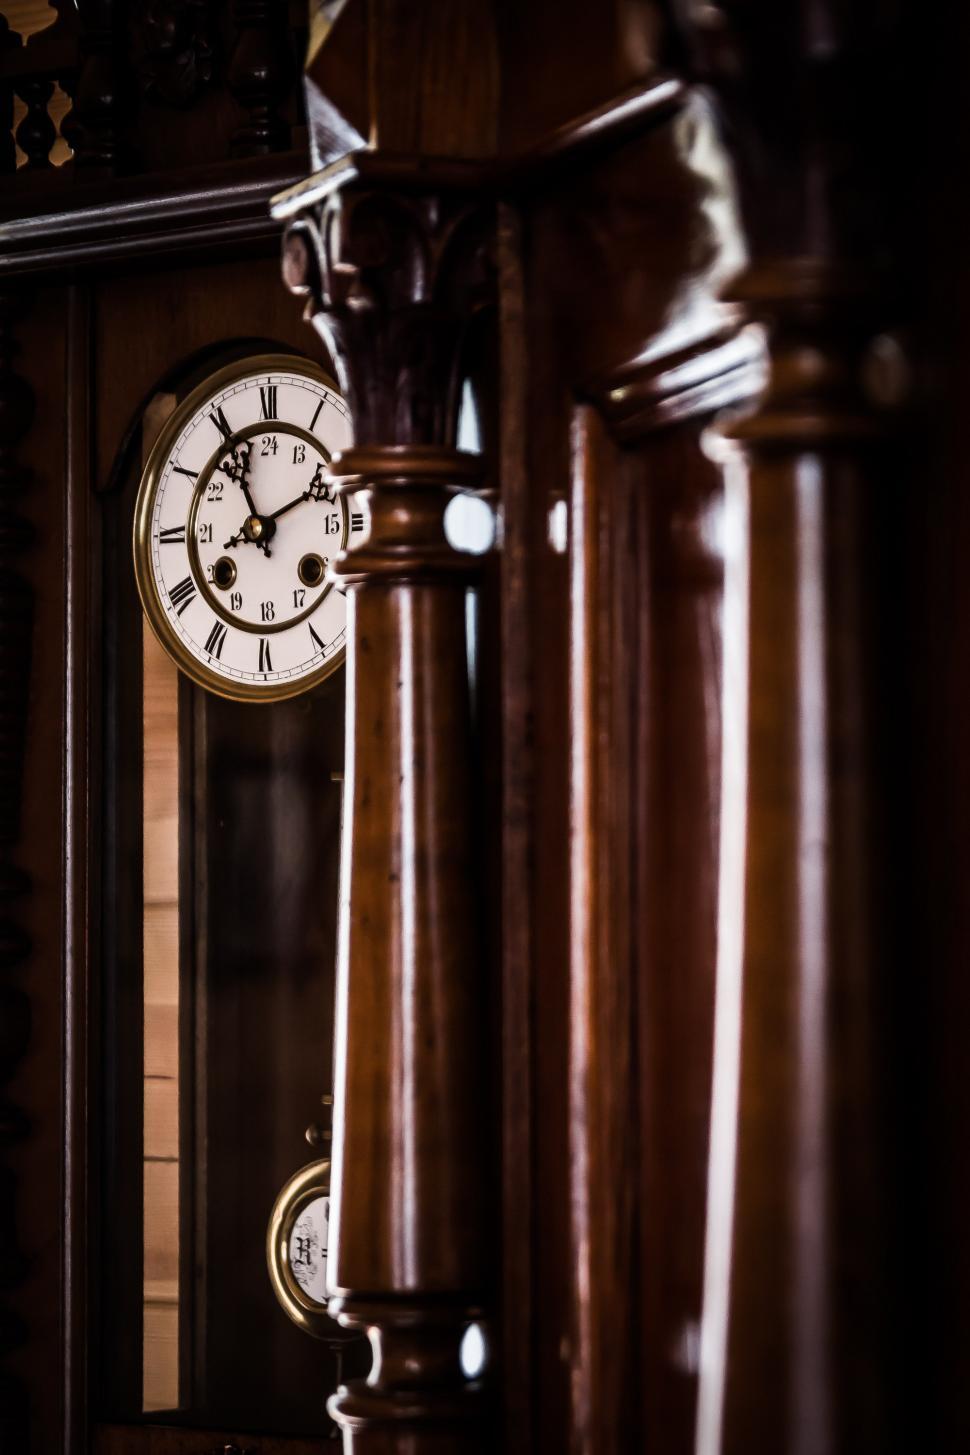 Free Image of Large Wooden Grandfather Clock With Roman Numerals 